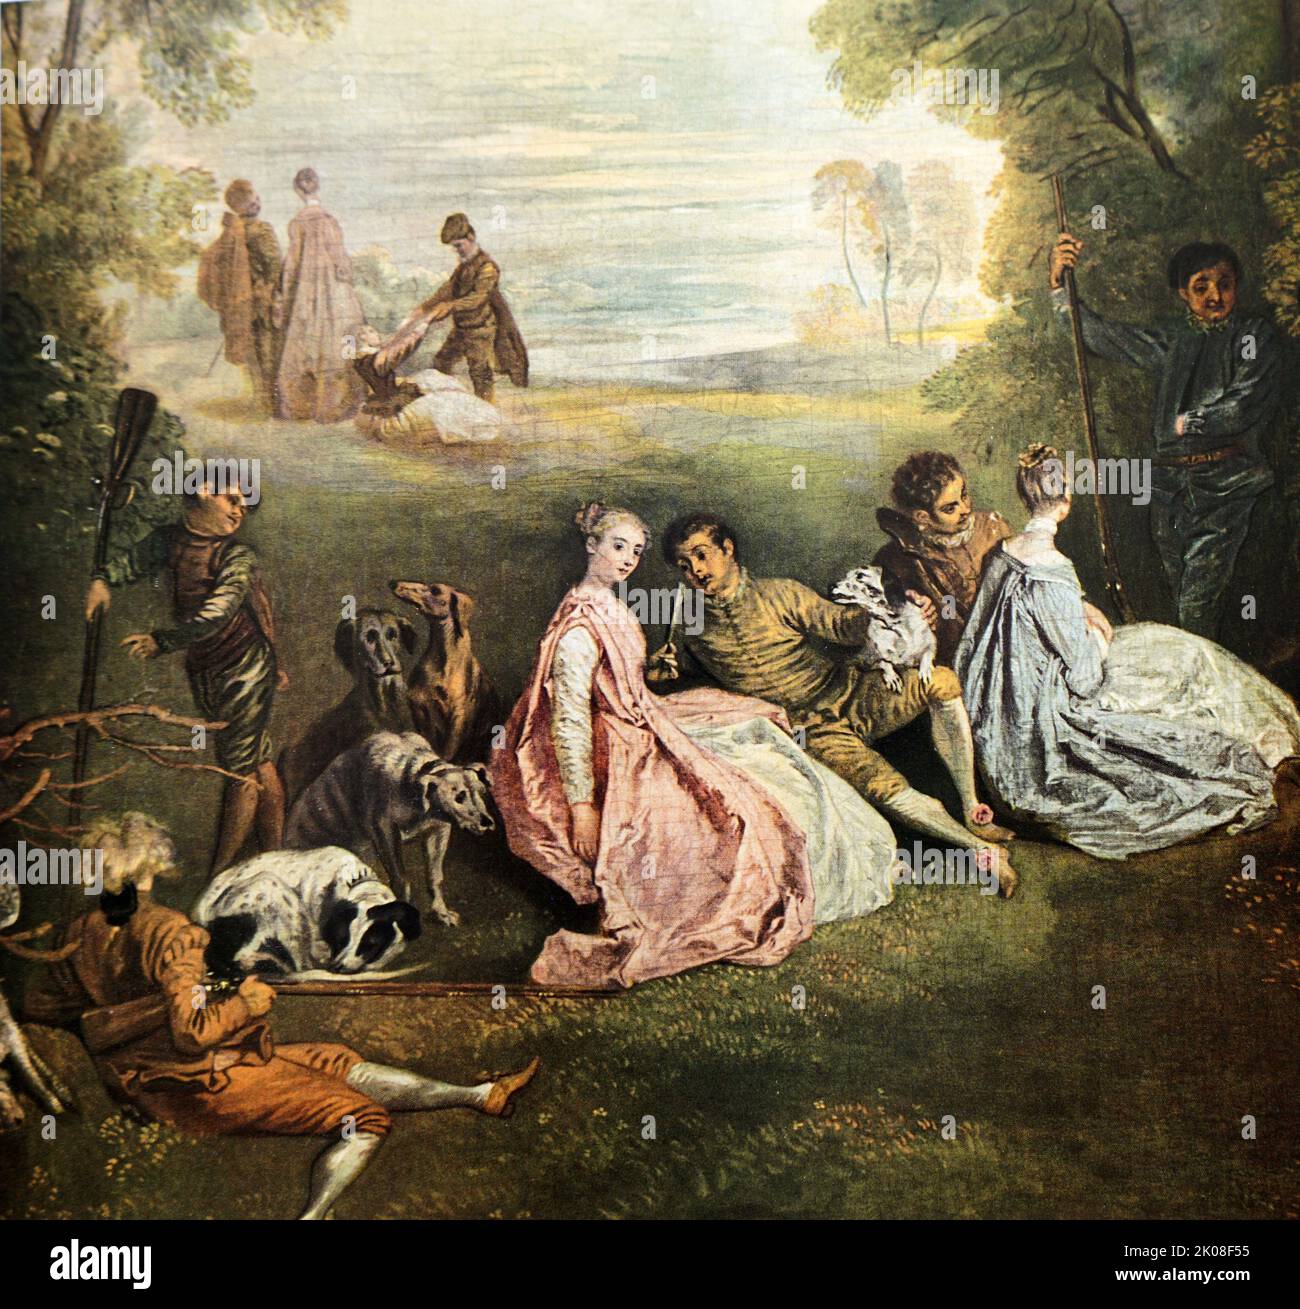 Le Rendez-vous de Chasse, c1720 by Jean-Antoine Watteau (baptised October 10, 1684 - died July 18, 1721) was a French painter and draughtsman whose brief career spurred the revival of interest in colour and movement, as seen in the tradition of Correggio and Rubens Stock Photo